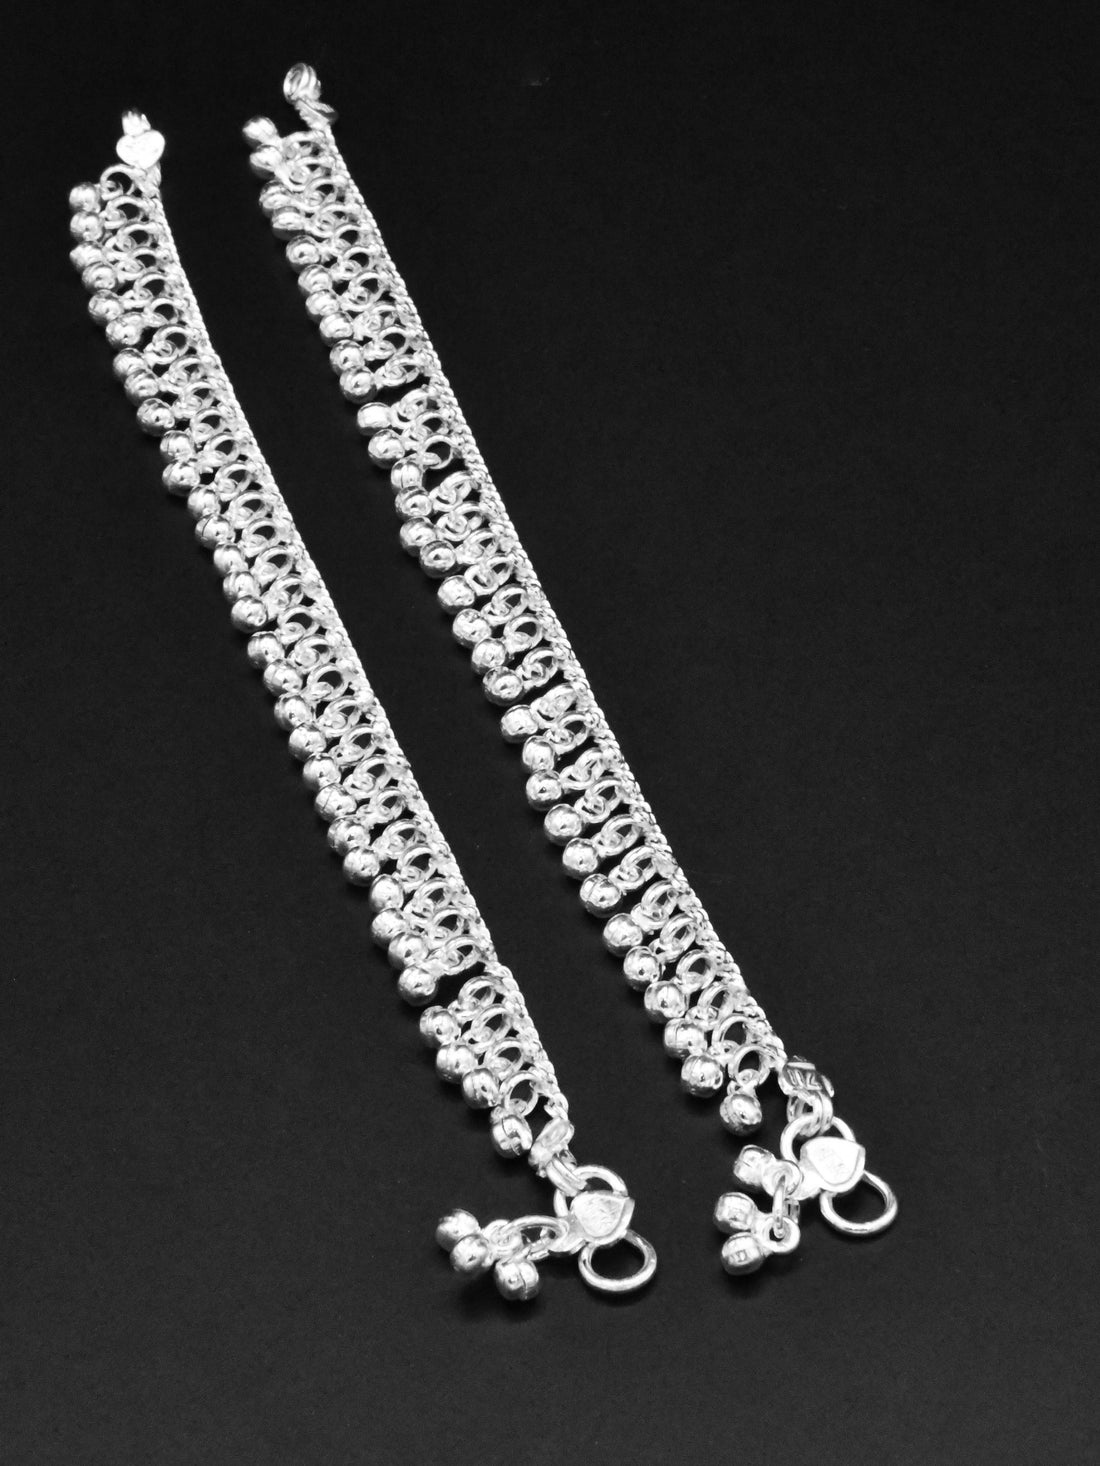 Silver 2 Piece Anklets - Roop Darshan